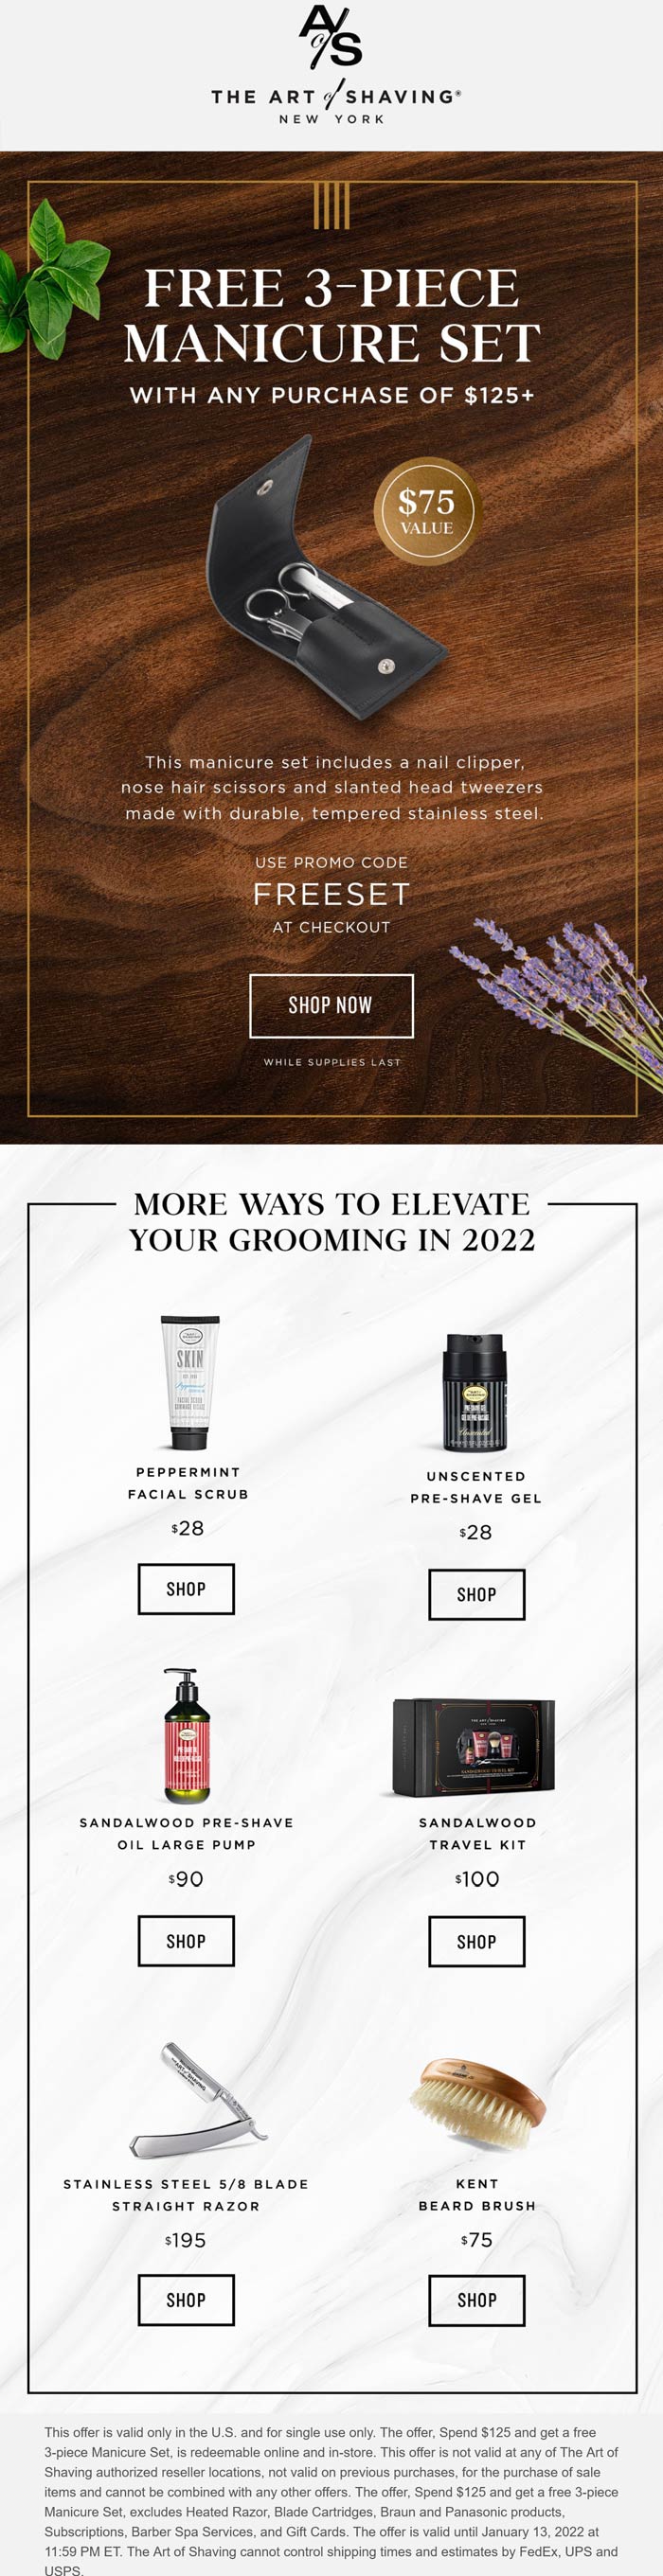 The Art of Shaving stores Coupon  Free 3-piece manicure set on $125 at The Art of Shaving, or online via promo code FREESET #theartofshaving 